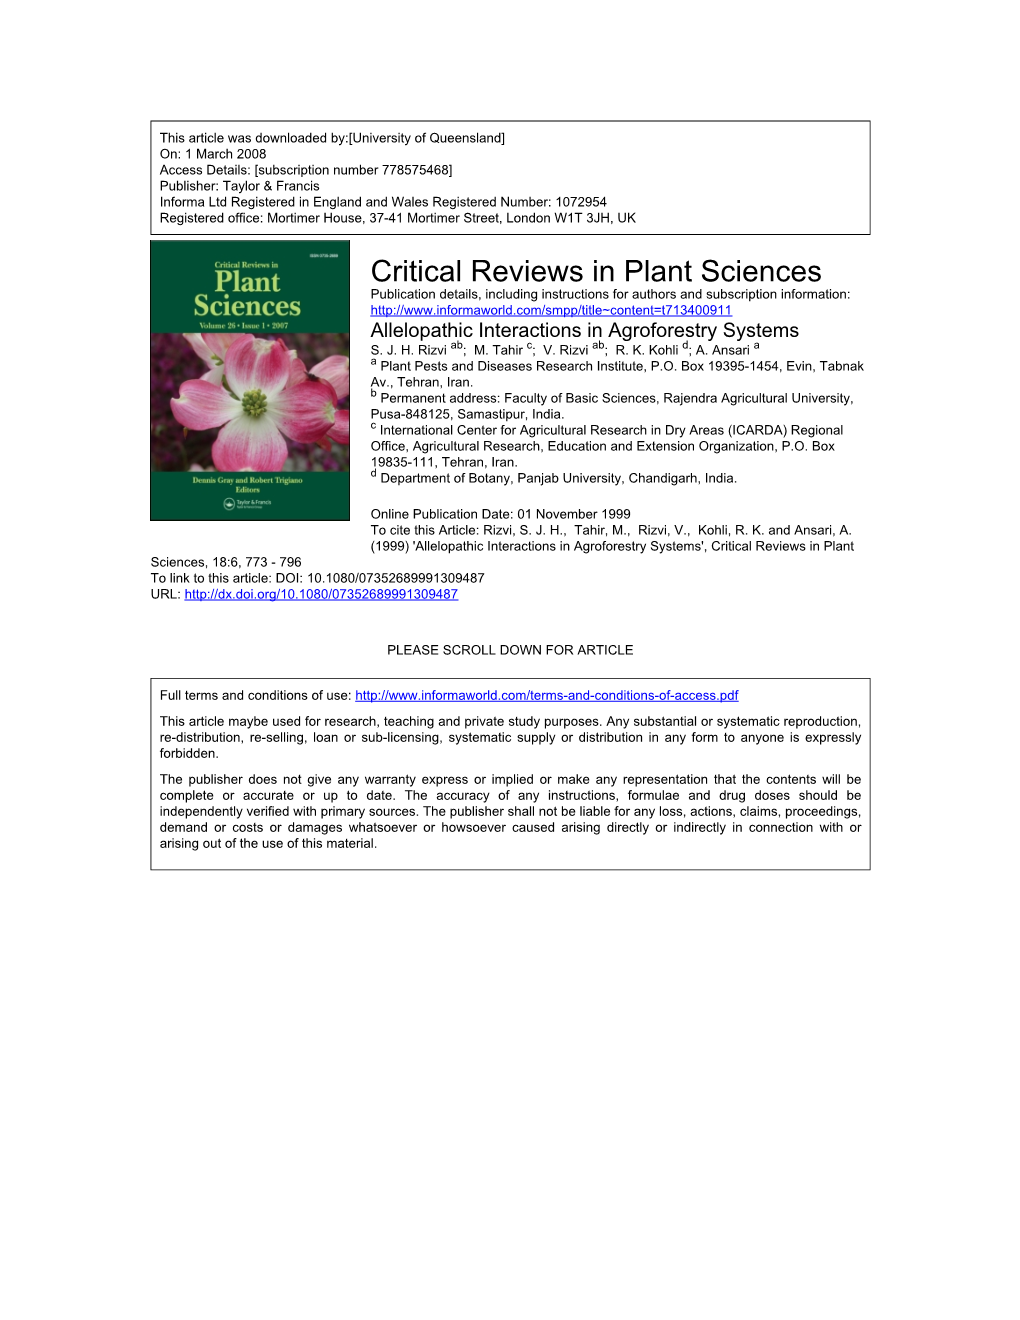 Critical Reviews in Plant Sciences